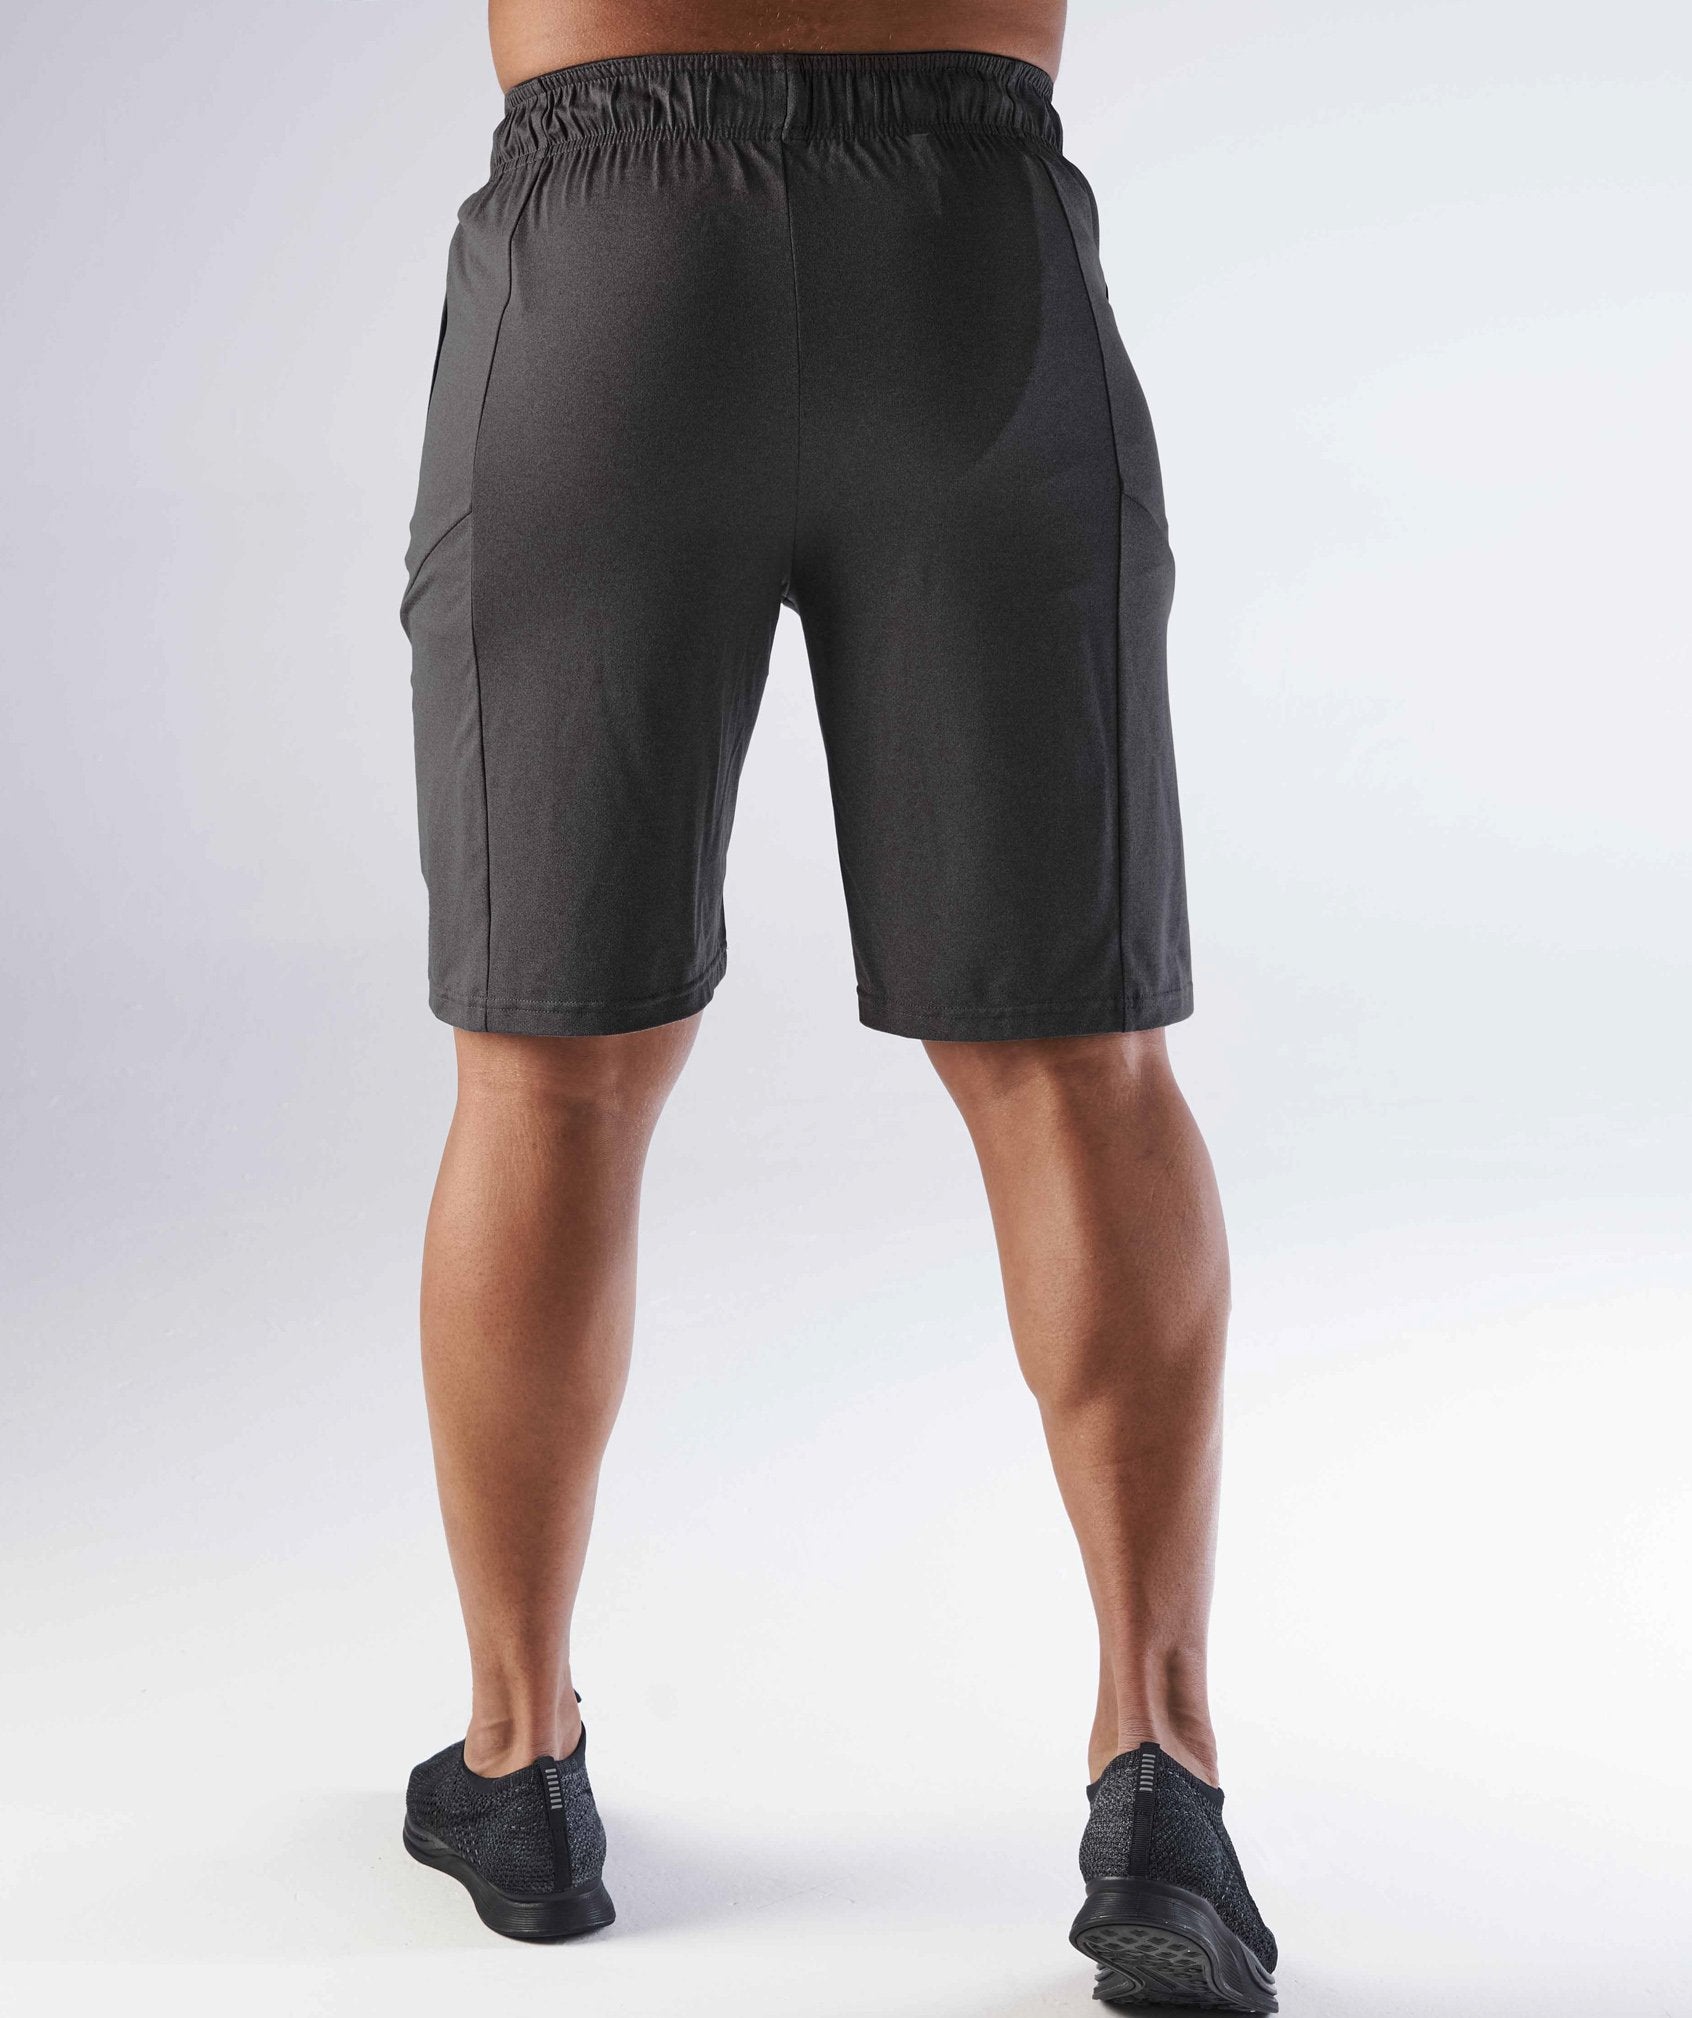 DRY Element Sweat Shorts in Black - view 4